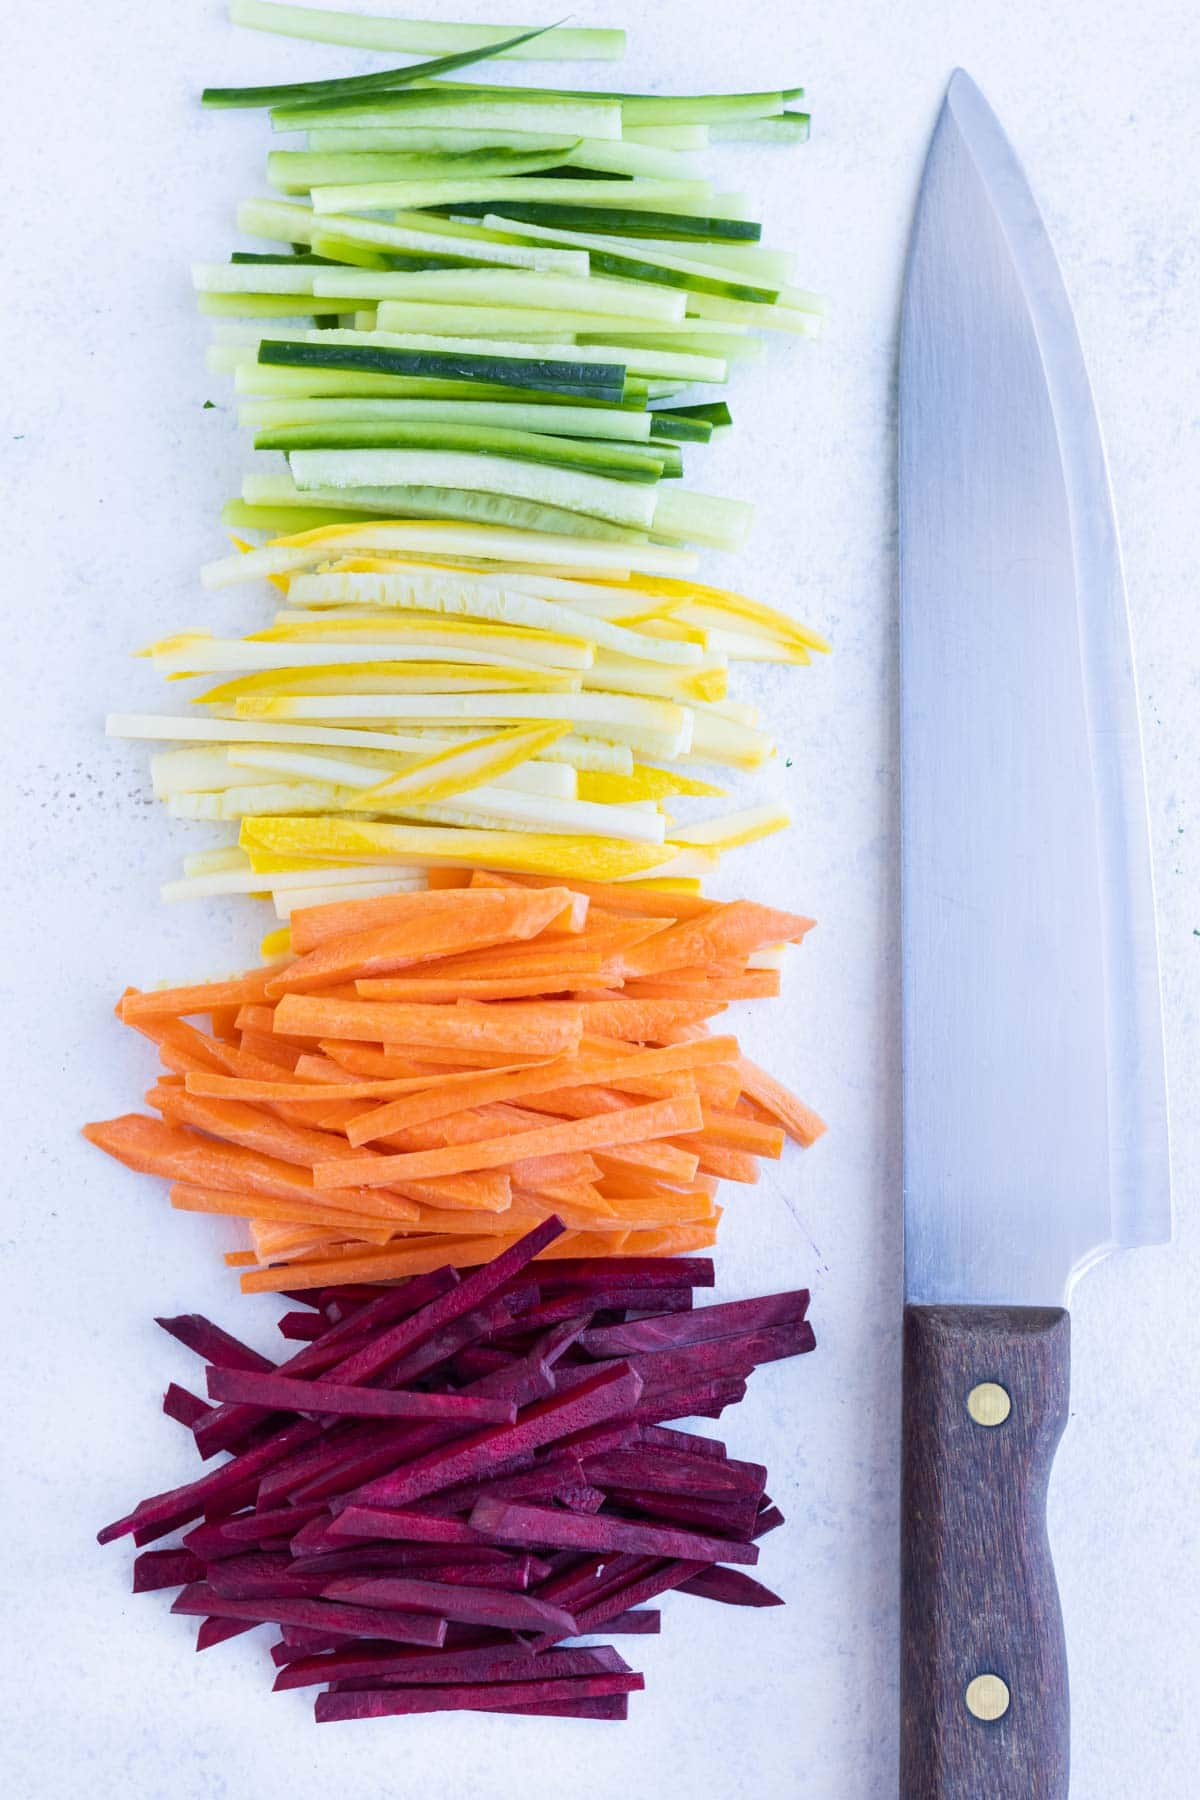 Vegetable Cutting Guide  How To Chop Vegetables Step-by-Step Guide